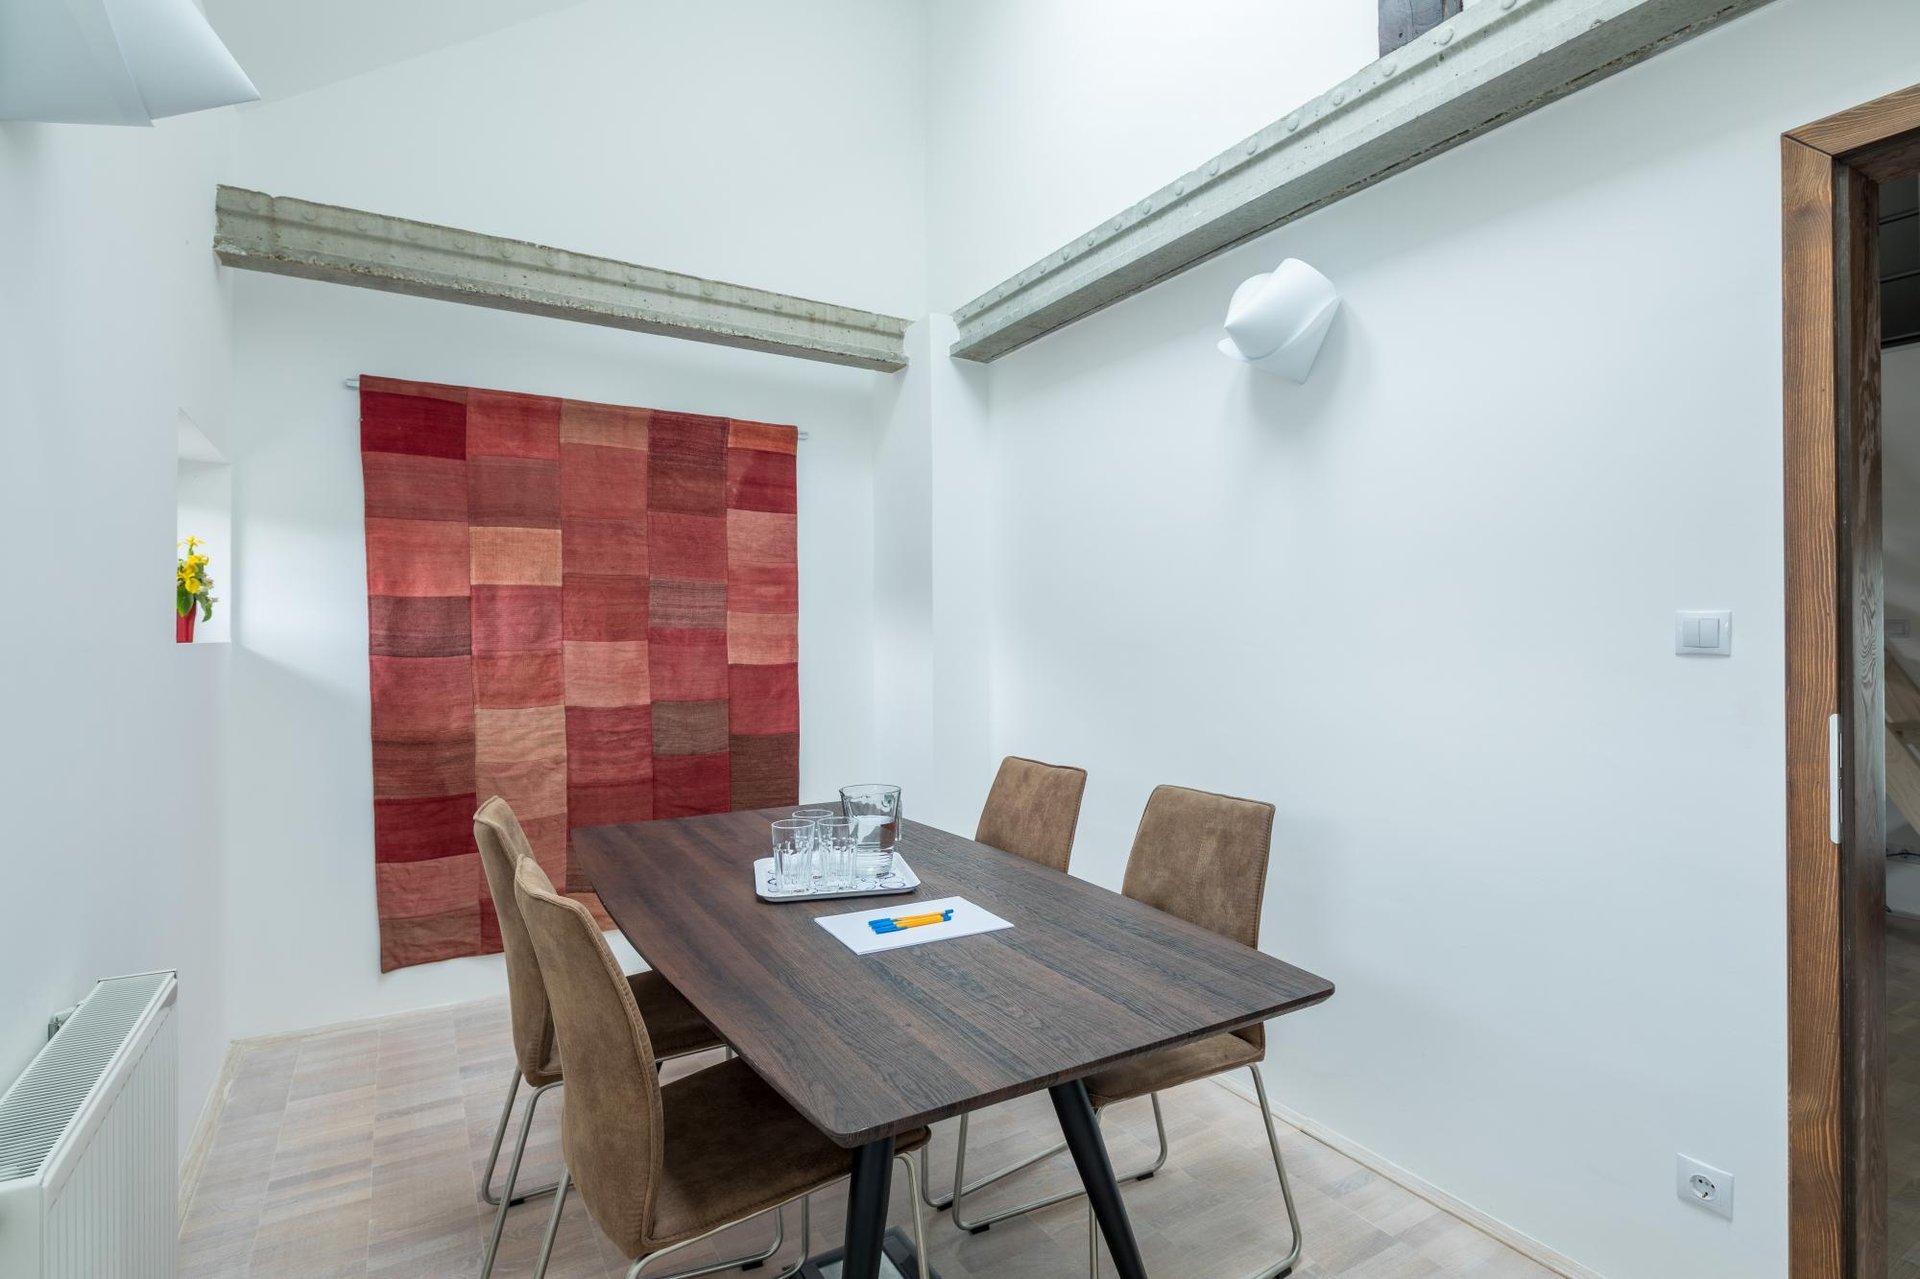 Meeting room for 6 pers. in PortusHome Coworking & Coliving